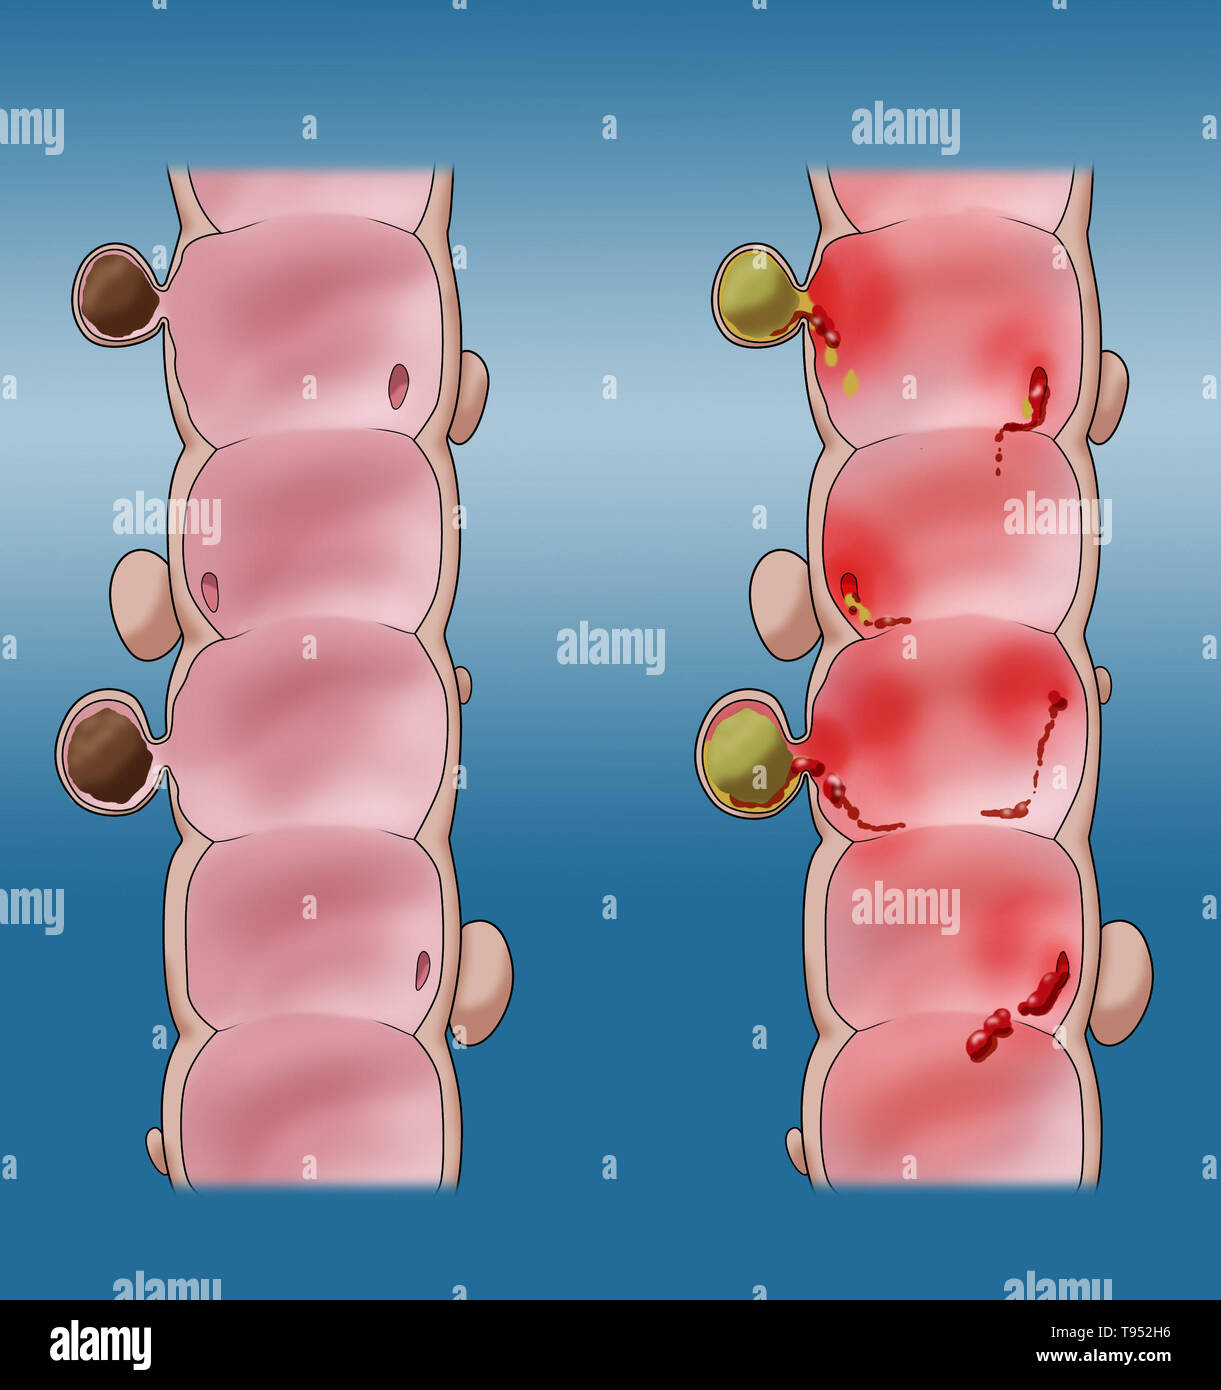 Illustration comparing a colon with diverticulosis (left) and diverticulitis (right). Stock Photo